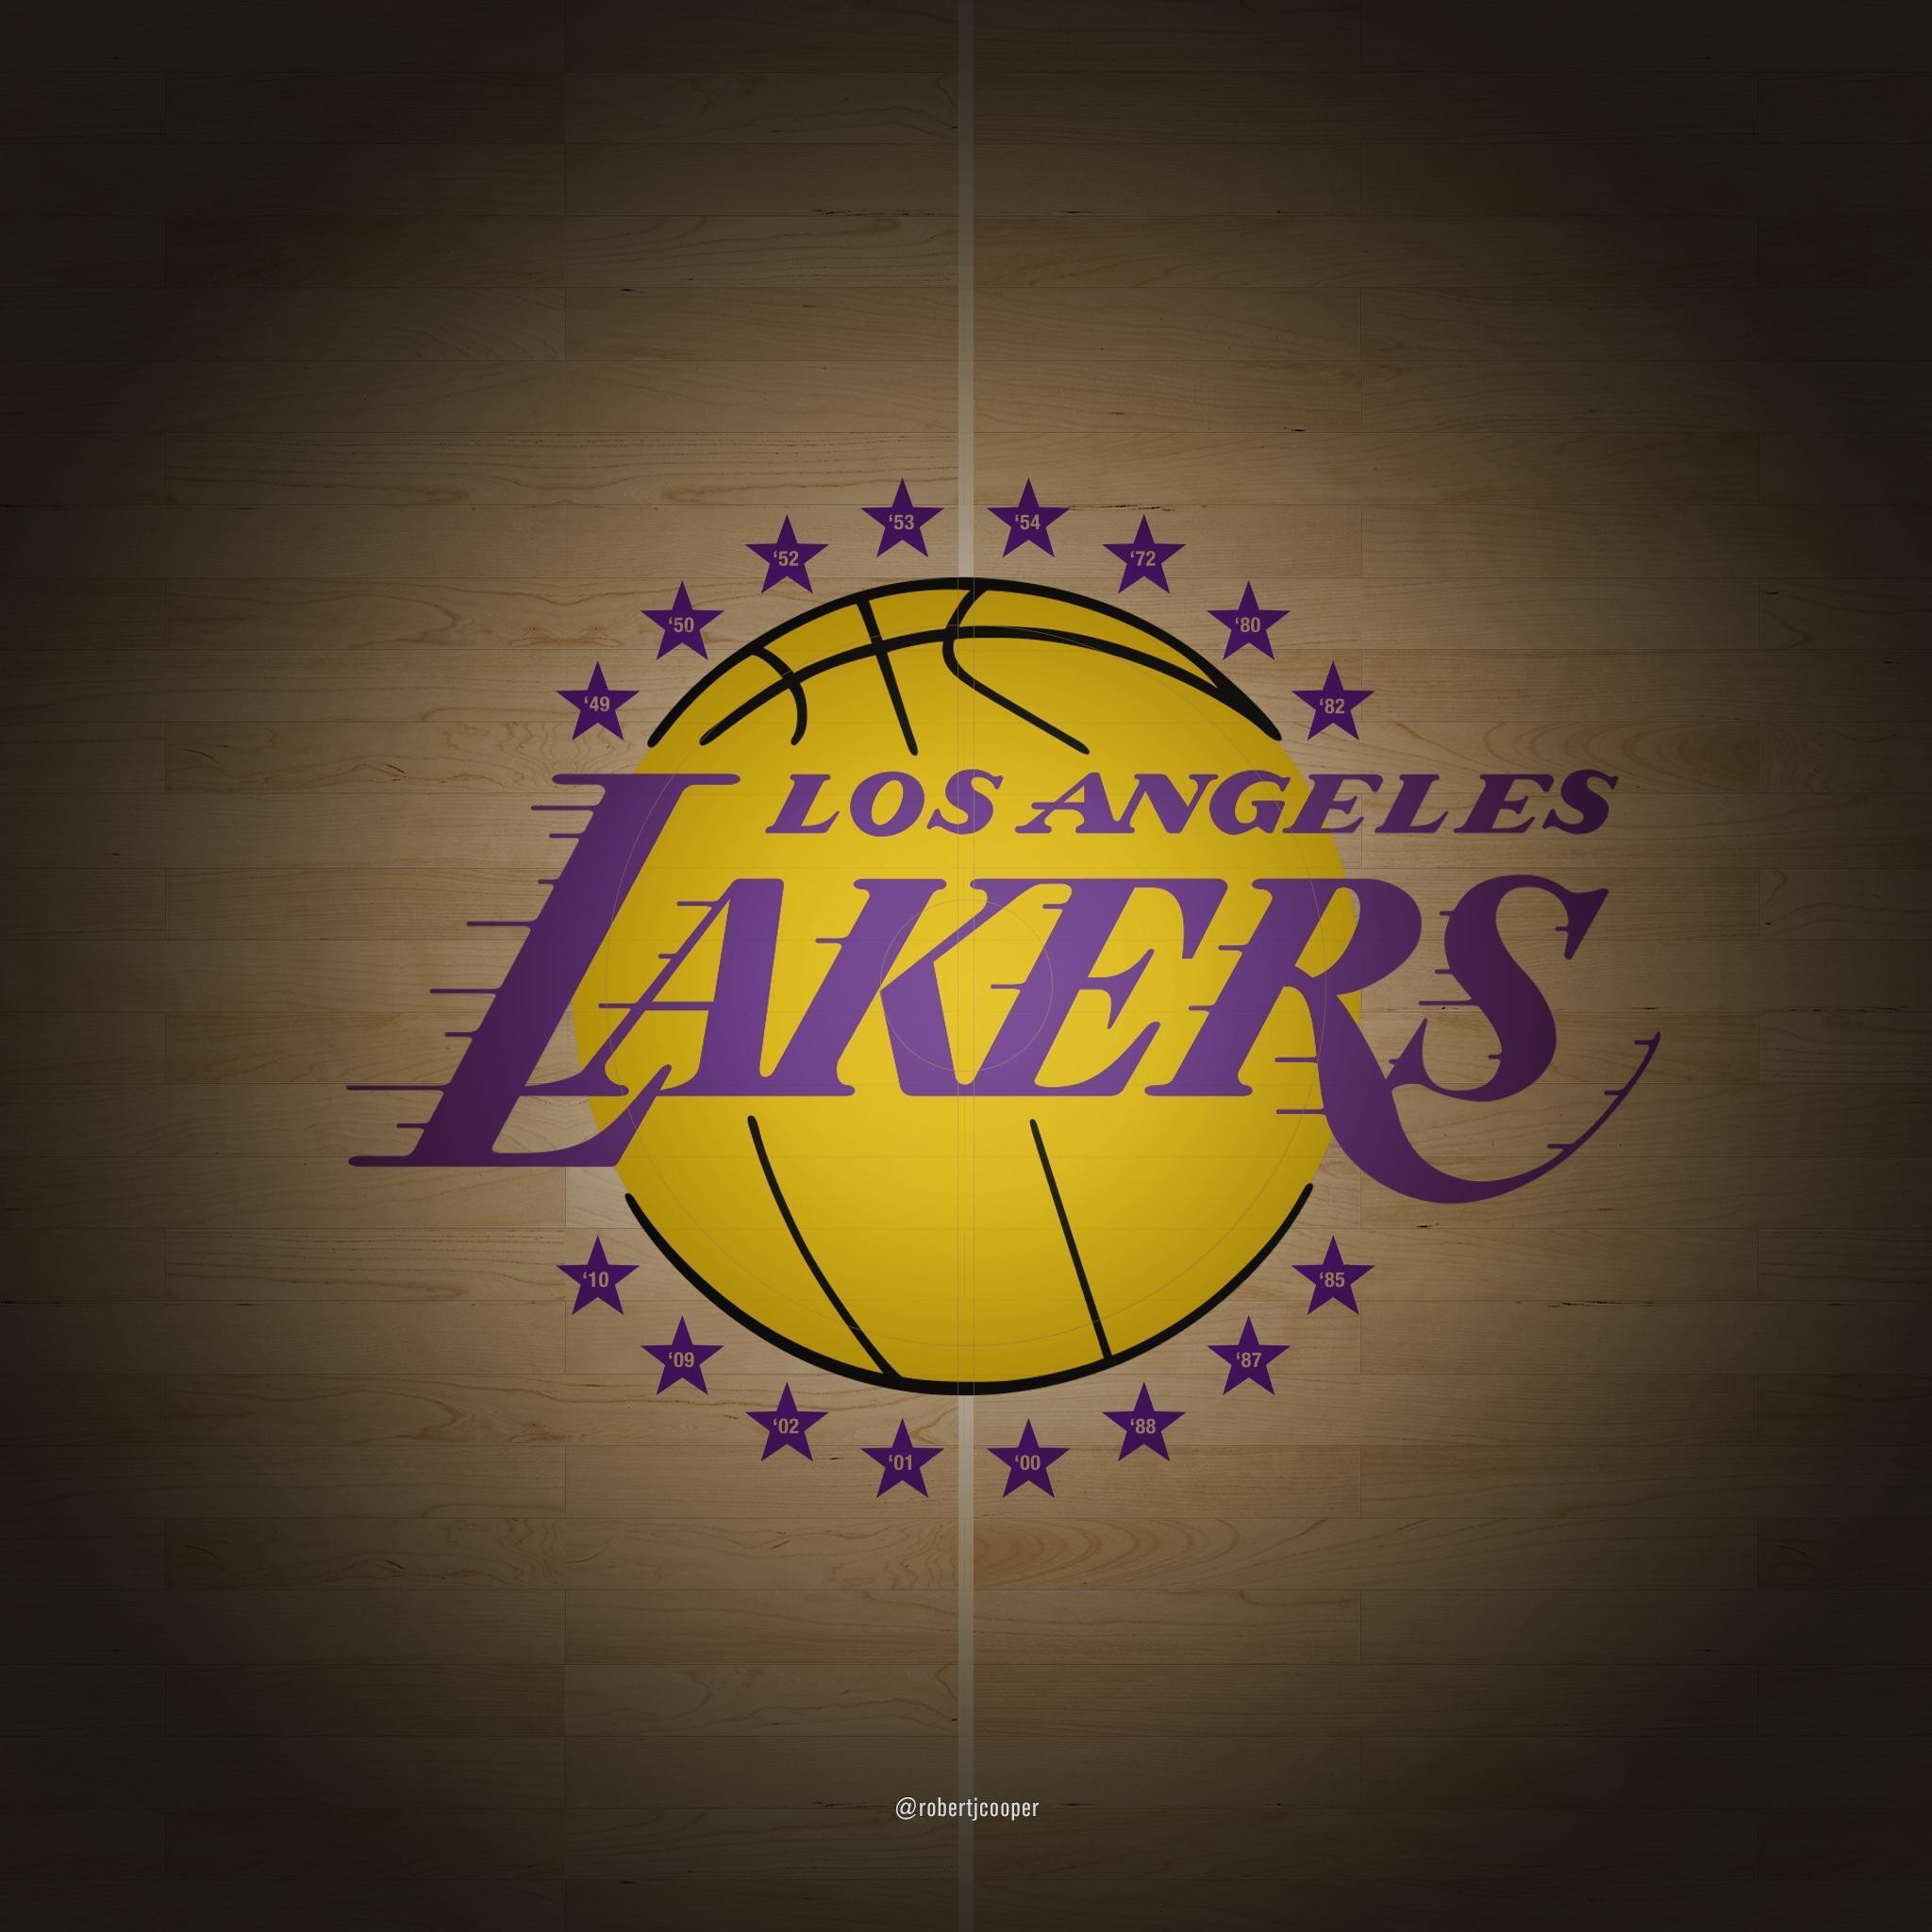 50 Los Angeles Lakers HD Wallpapers and Backgrounds